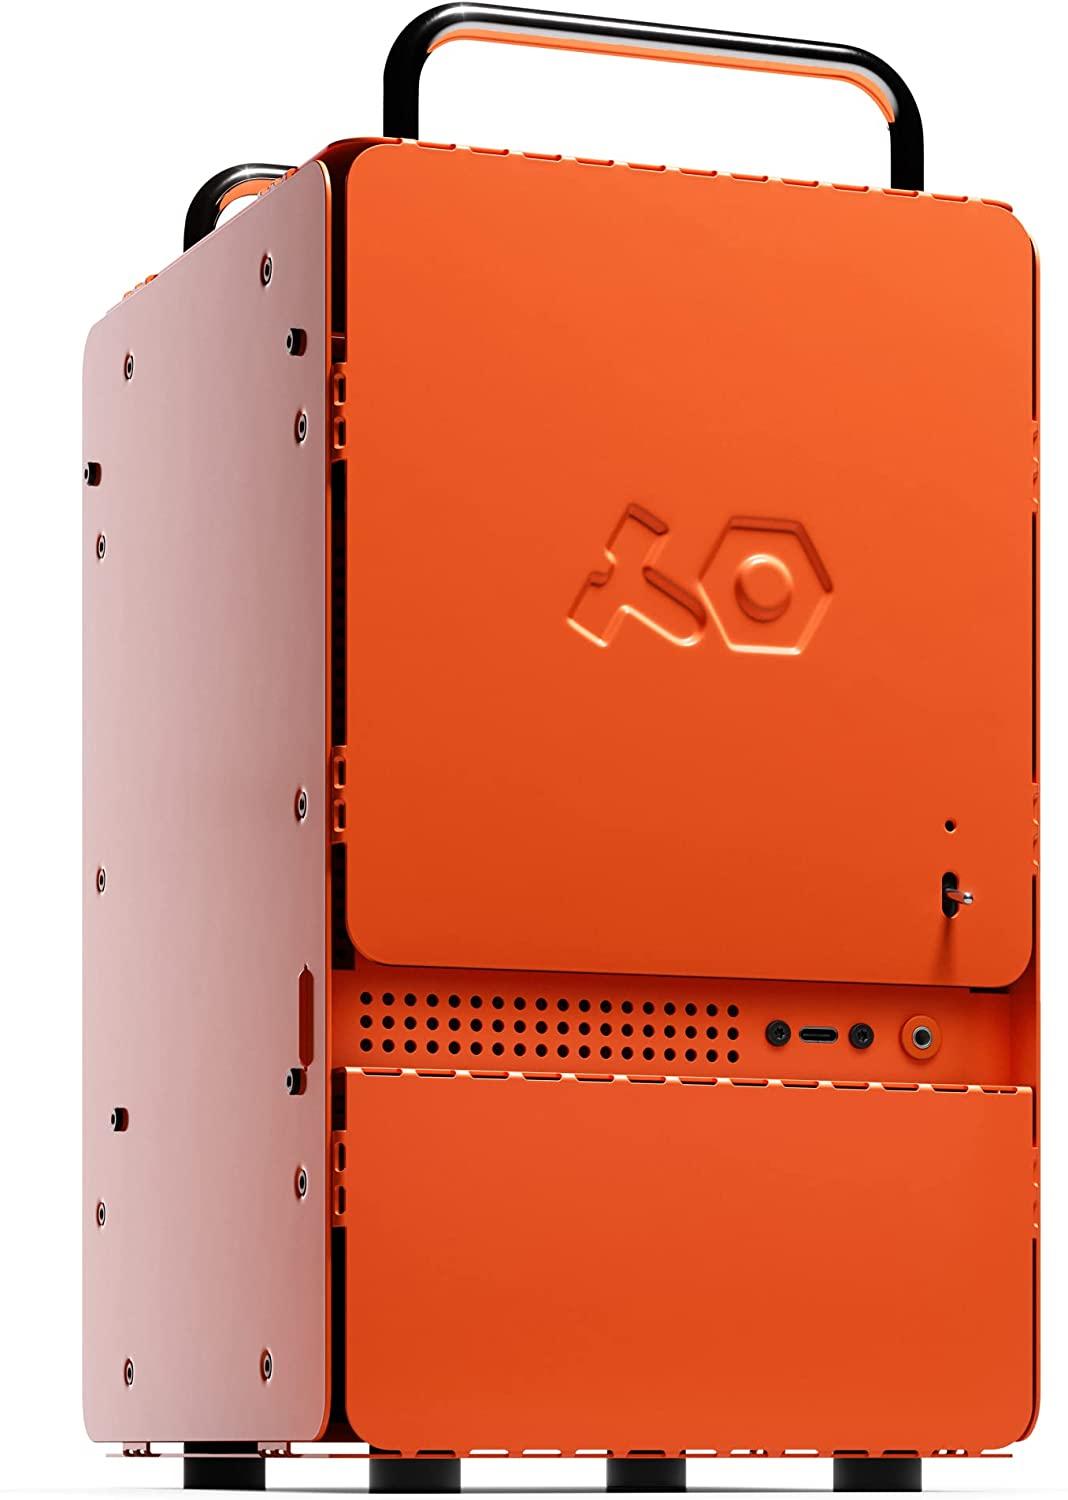 Teenage Engineering’s Computer-1 Mini-ITX Chassis shows off how a PC can look awesome 